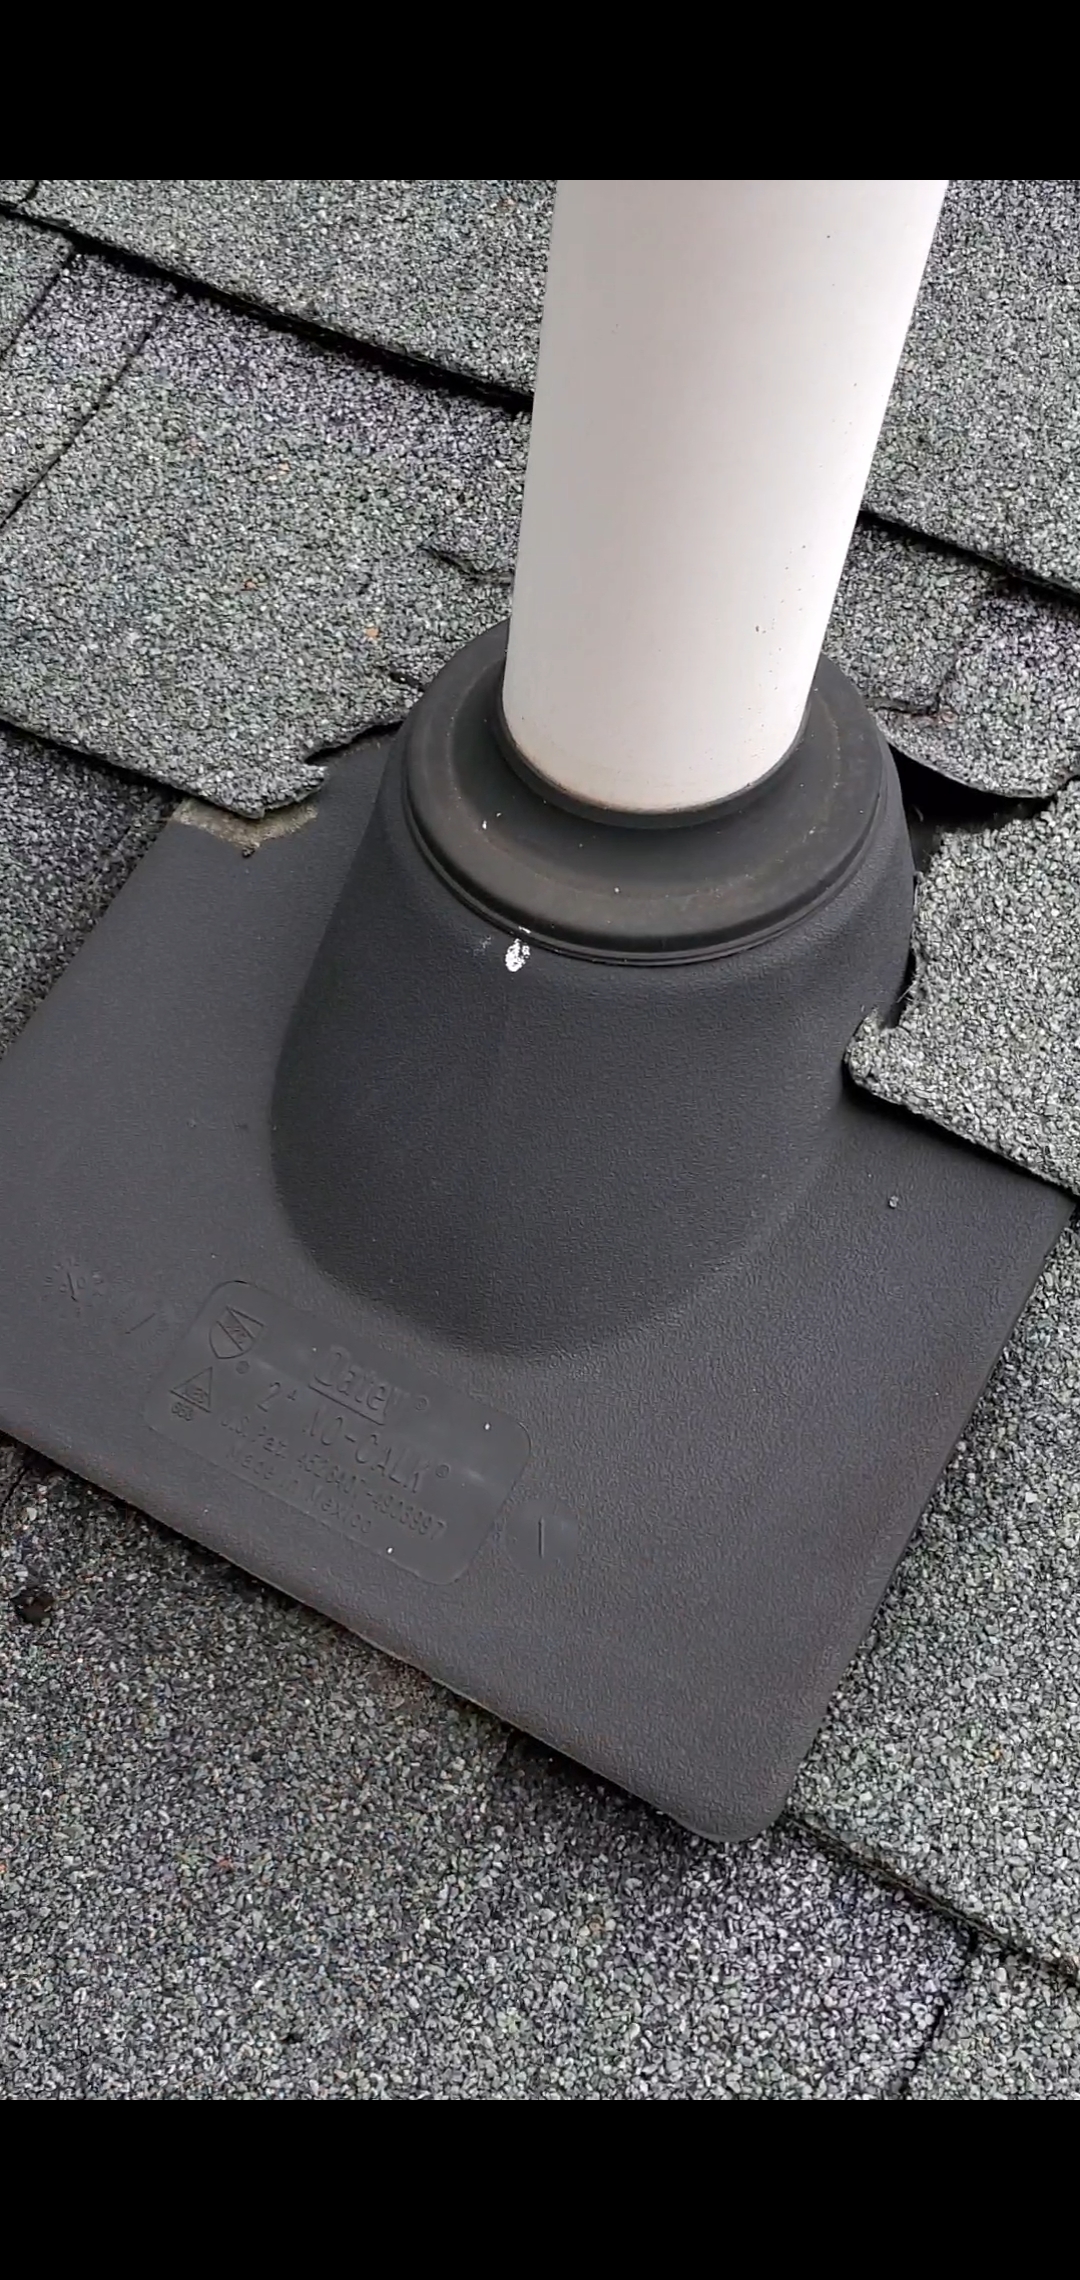 This is a picture of a pipe boot and the pipe coming out of the roof